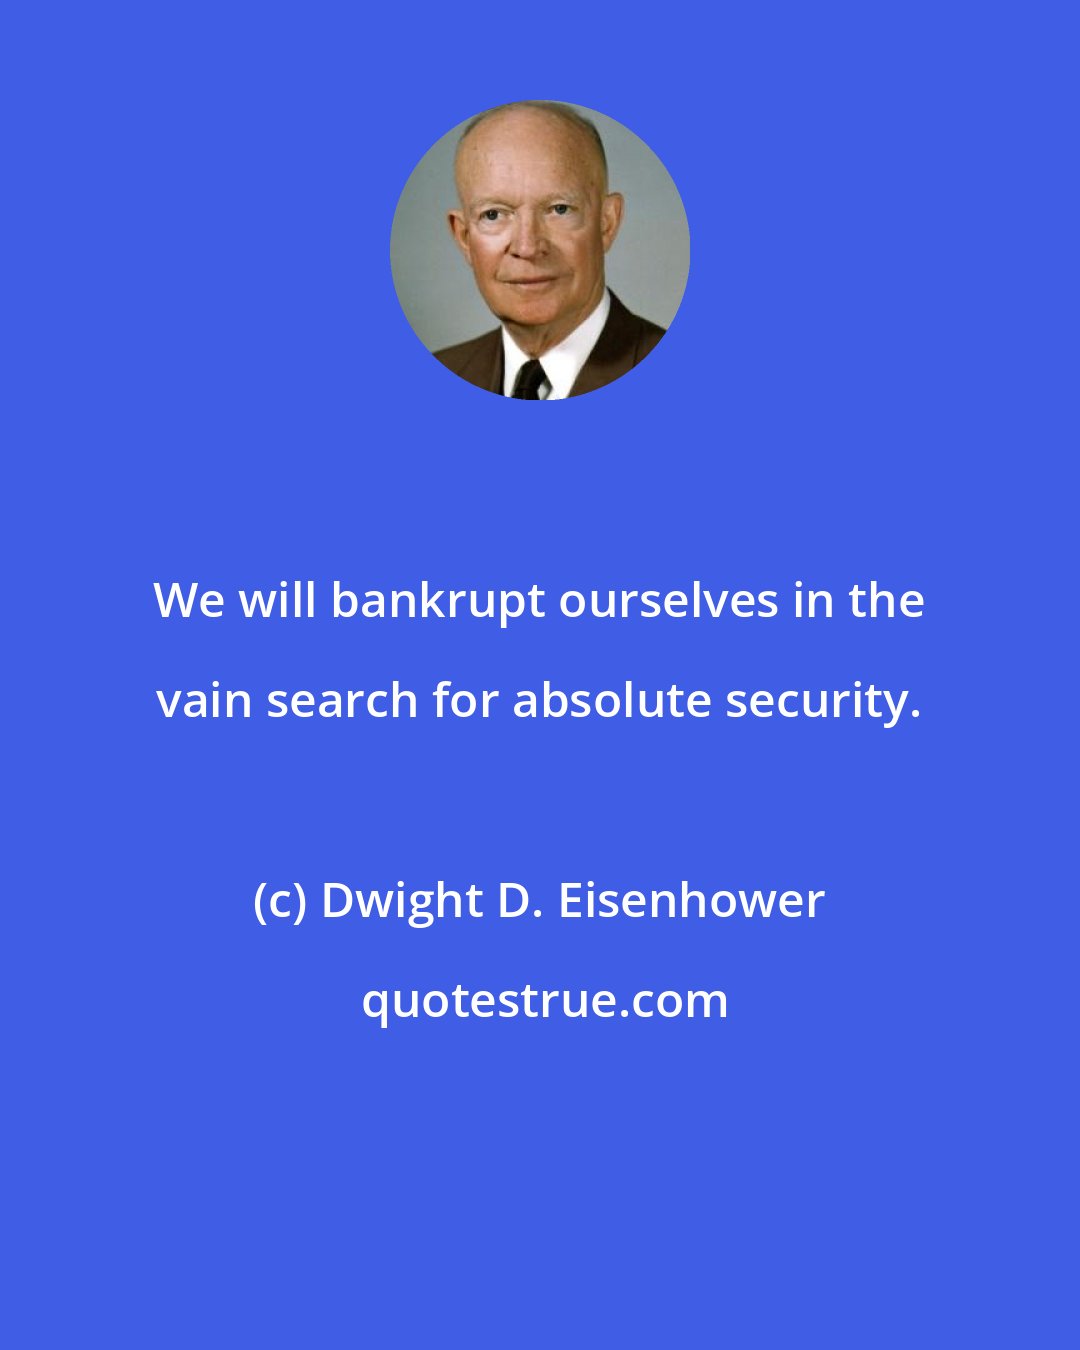 Dwight D. Eisenhower: We will bankrupt ourselves in the vain search for absolute security.